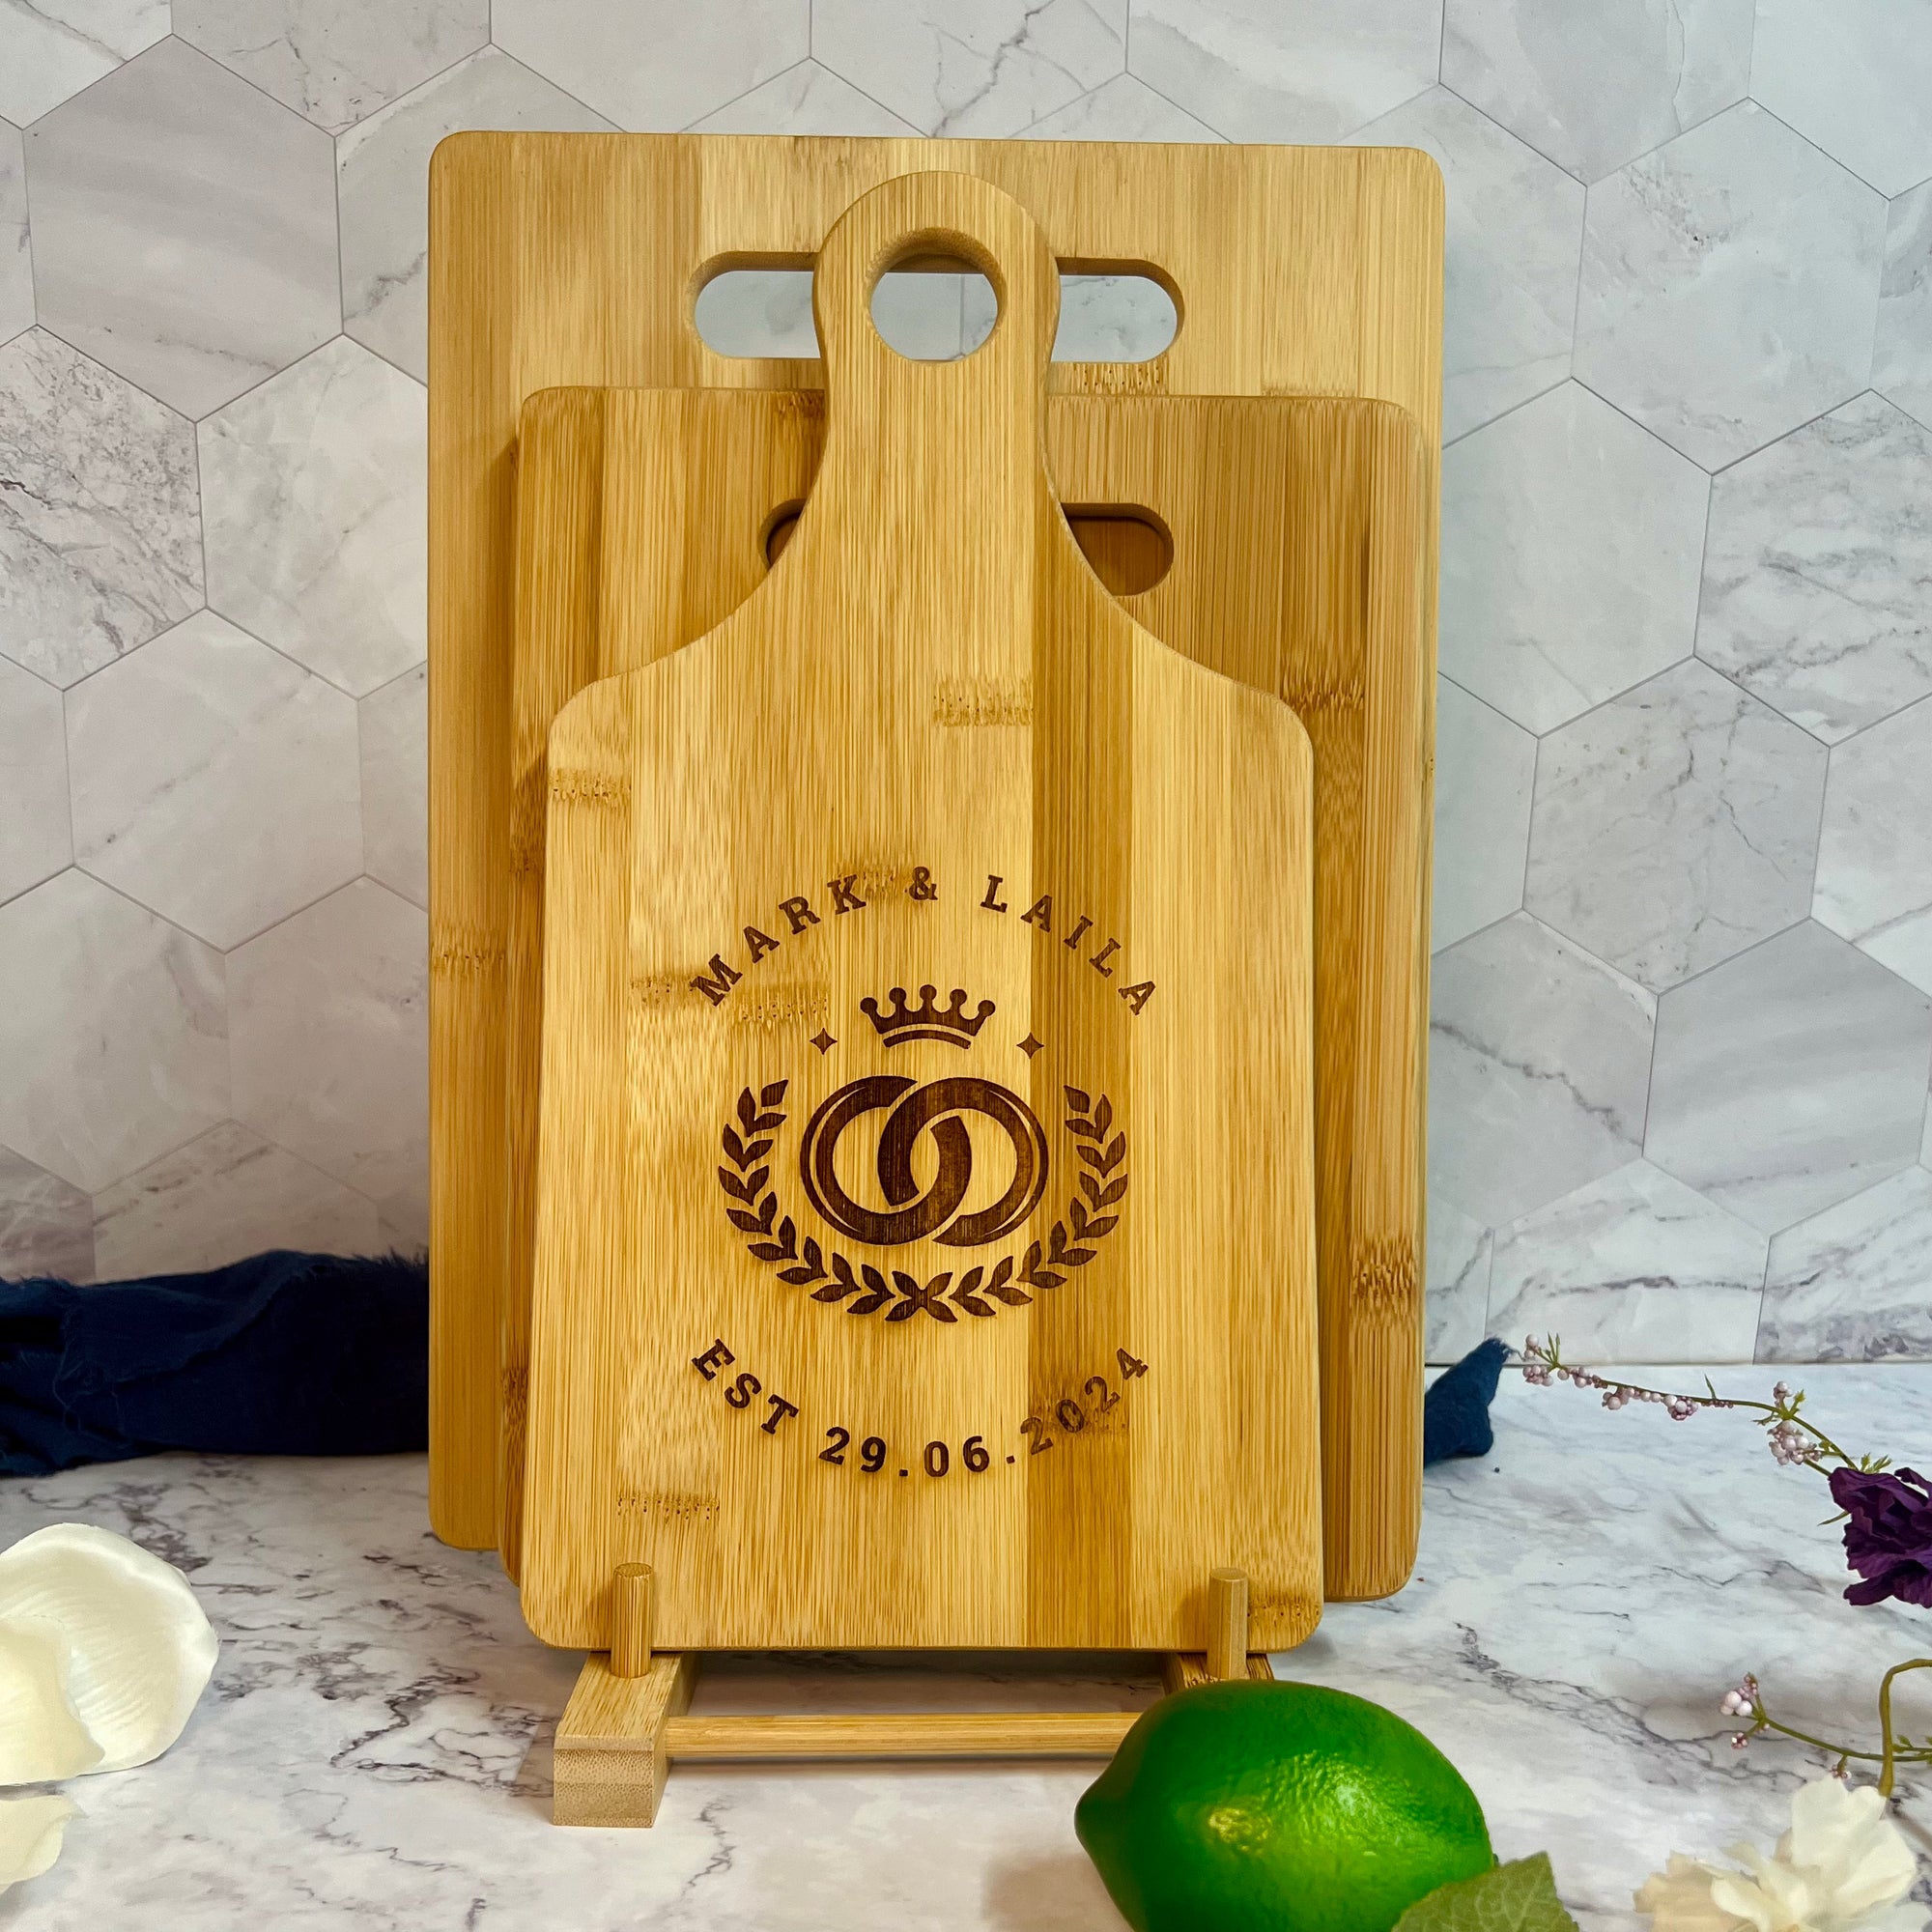 Personalised 3 Bamboo Chopping Boards &amp; Stand Set Custom Engraved Wooden Cutting Paddle Tray Charcuterie Platter Housewarming Corporate Gift